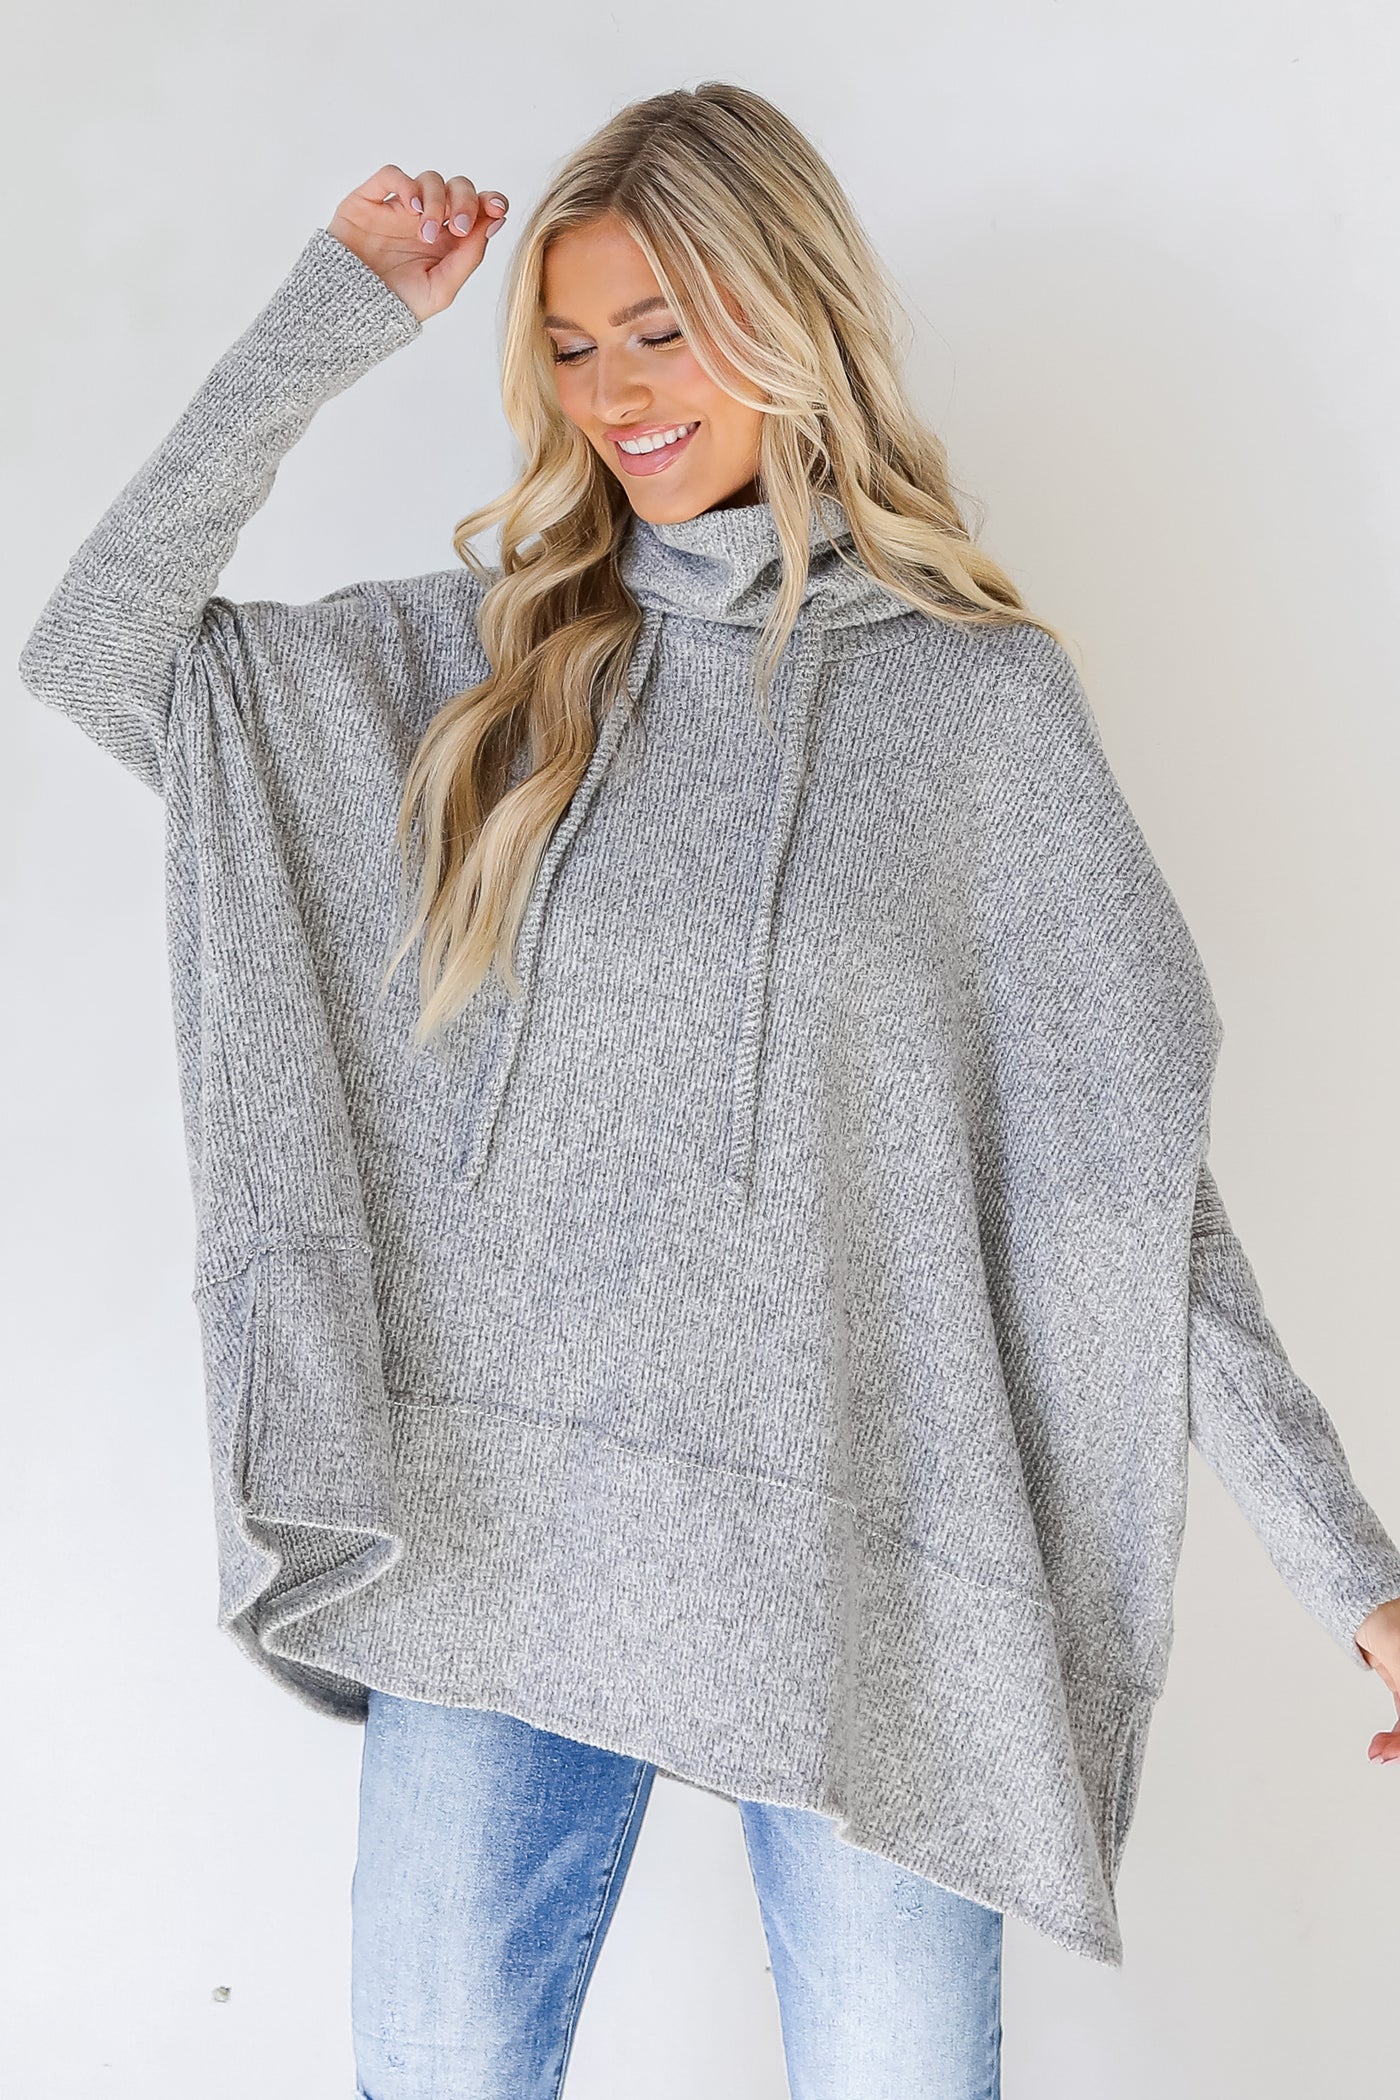 Oversized Cowl Neck Sweater in heather grey